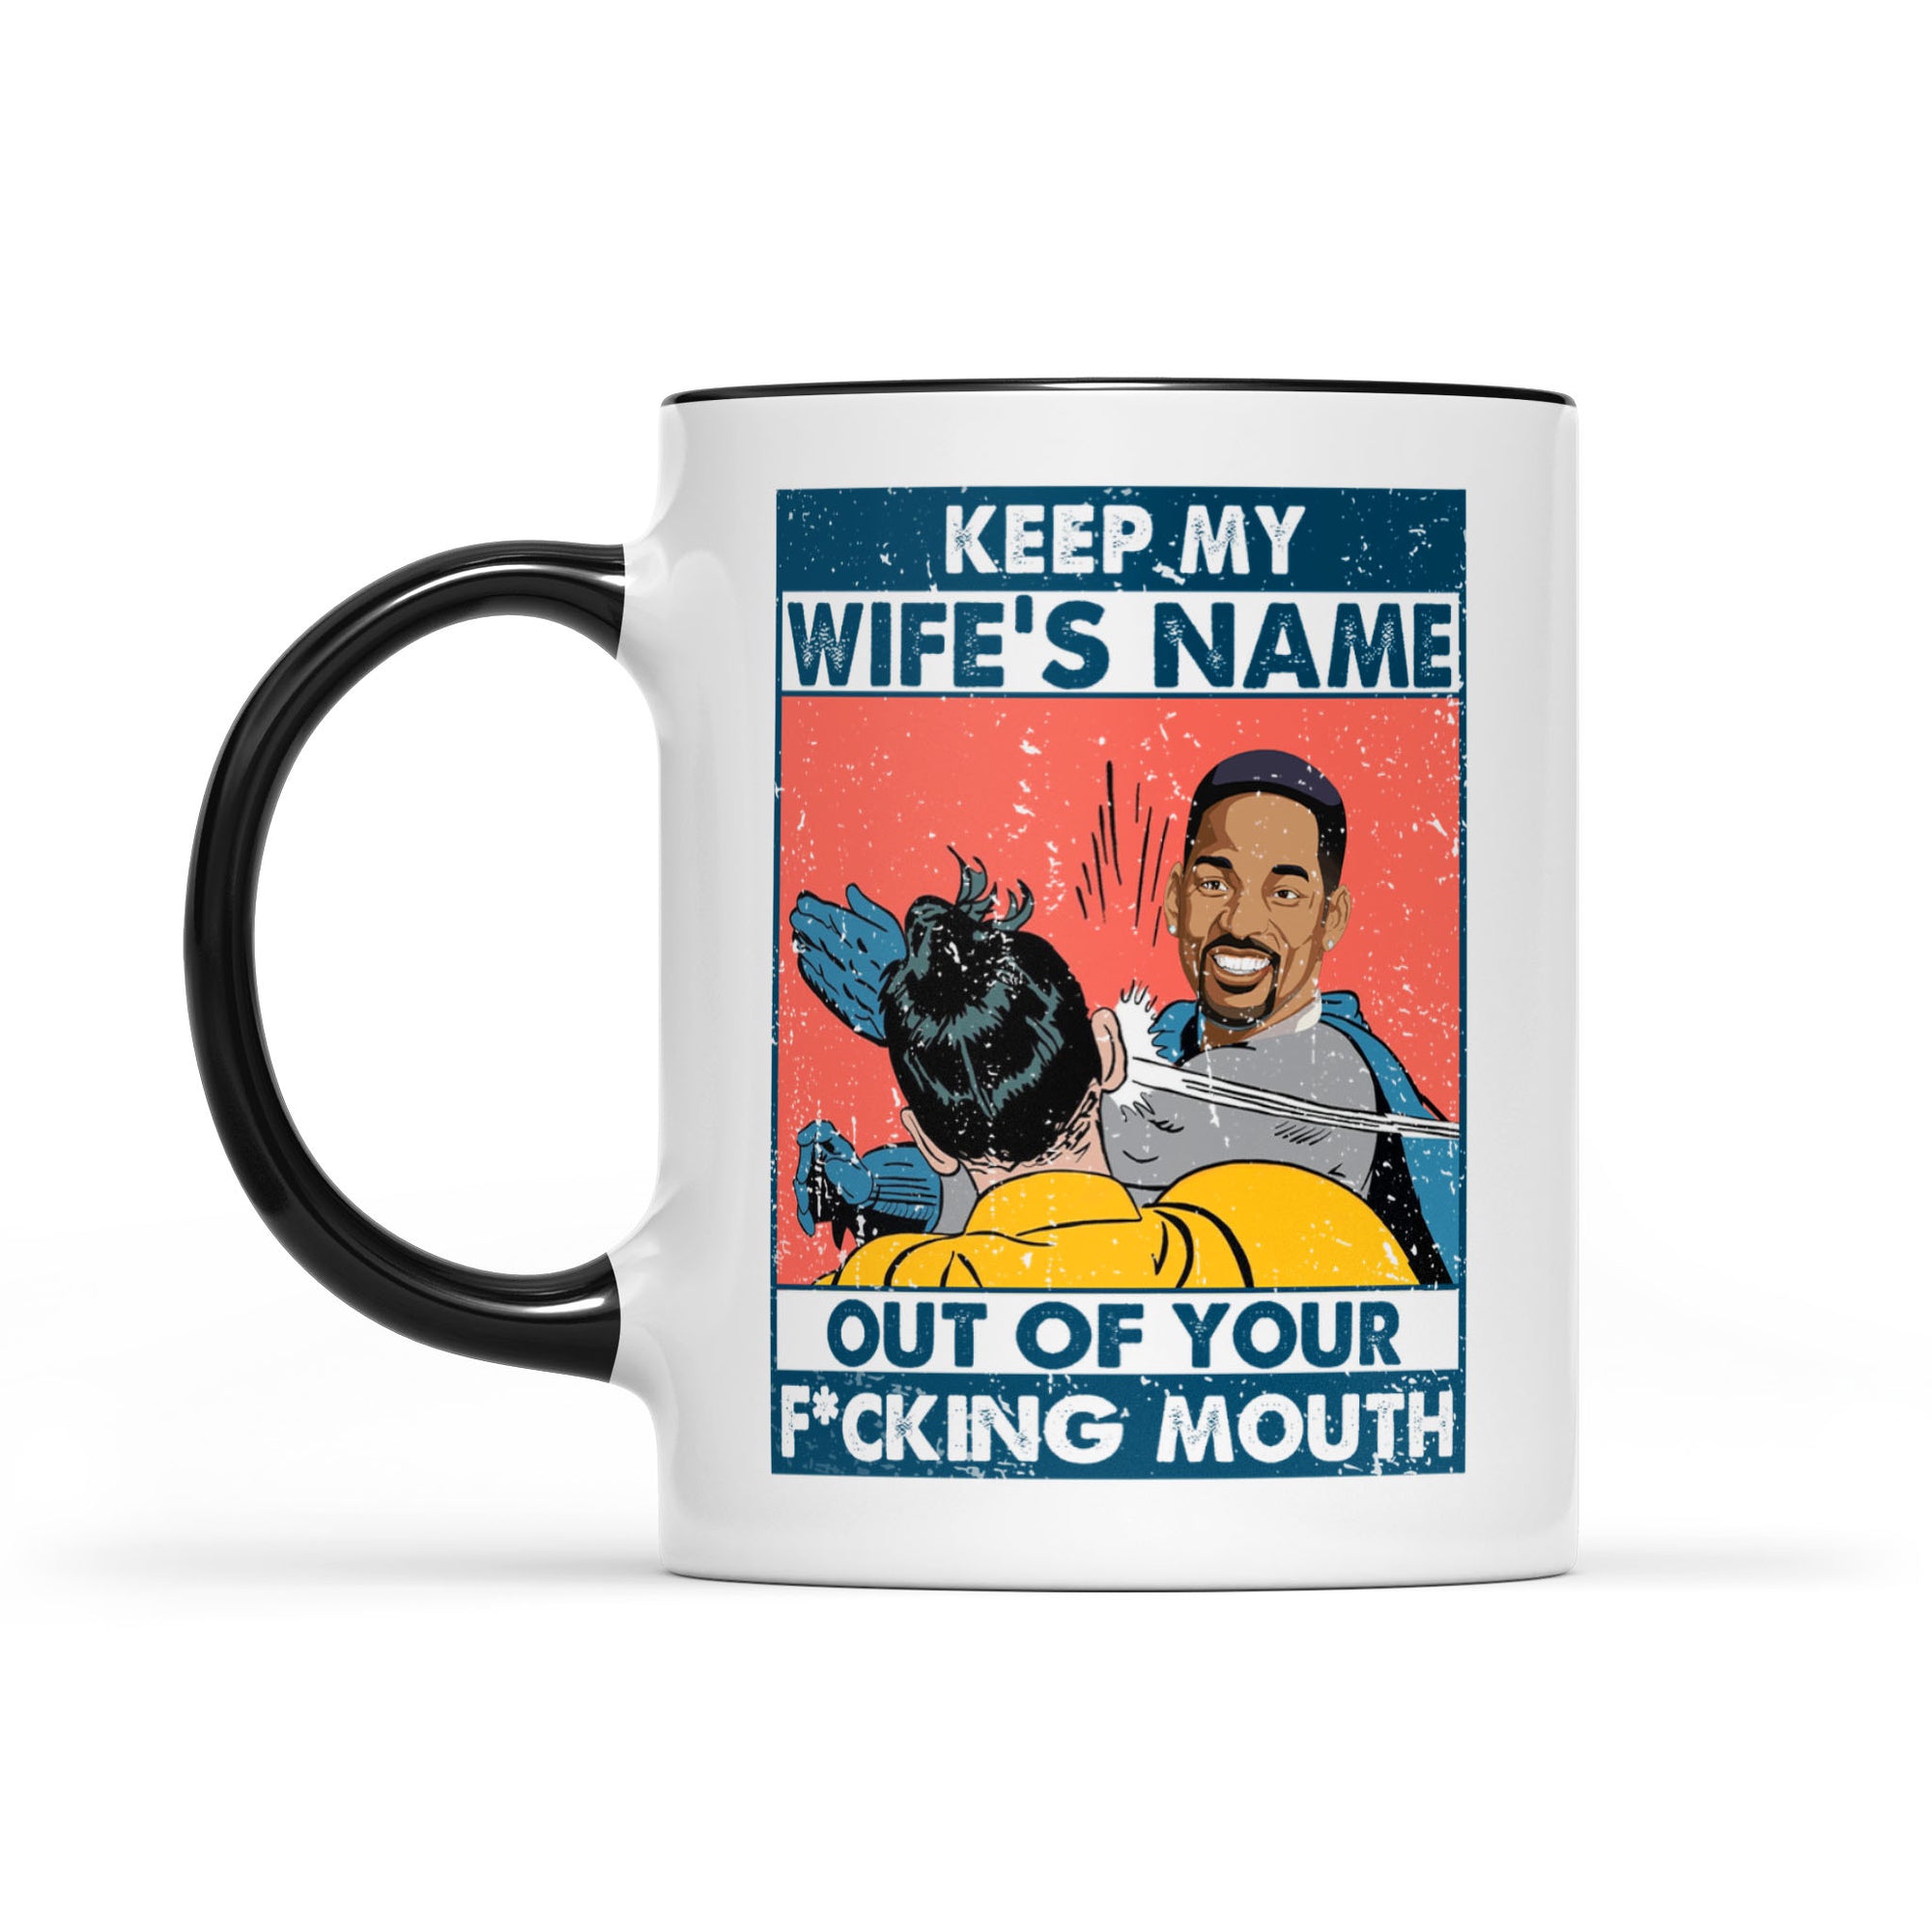 Keep My Wife’s Name Out Your Mouth,Will Smith, Oscar 2022 - Accent Mug